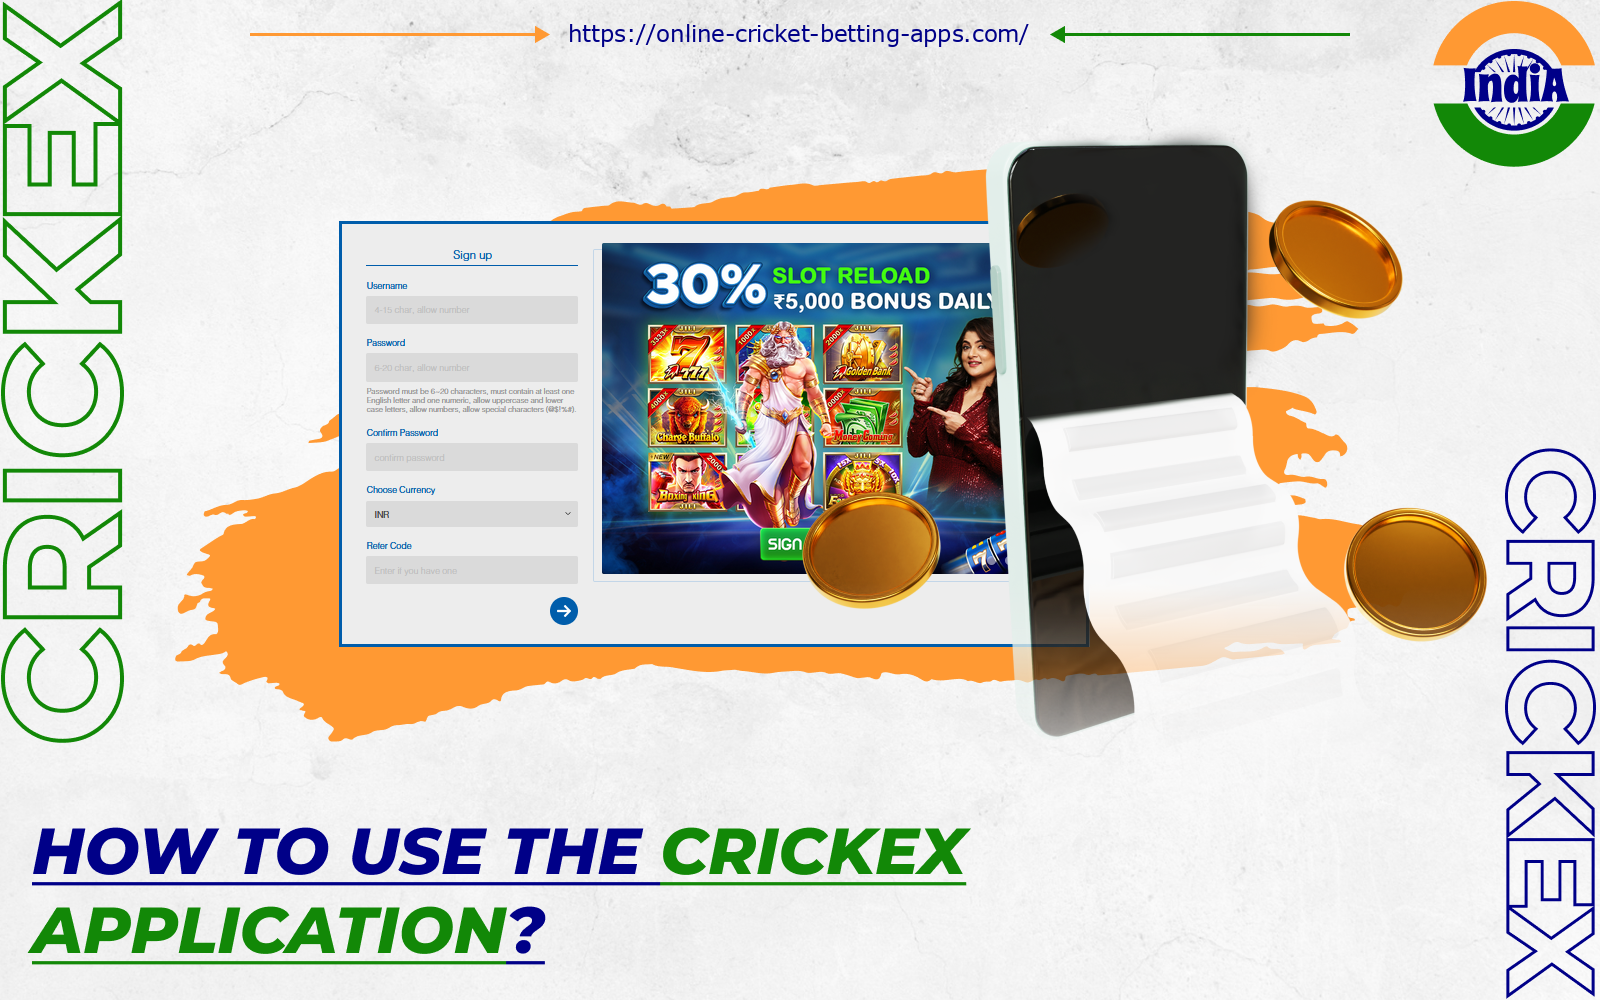 To start gambling on the Crickex app, Indians need to register and make a deposit